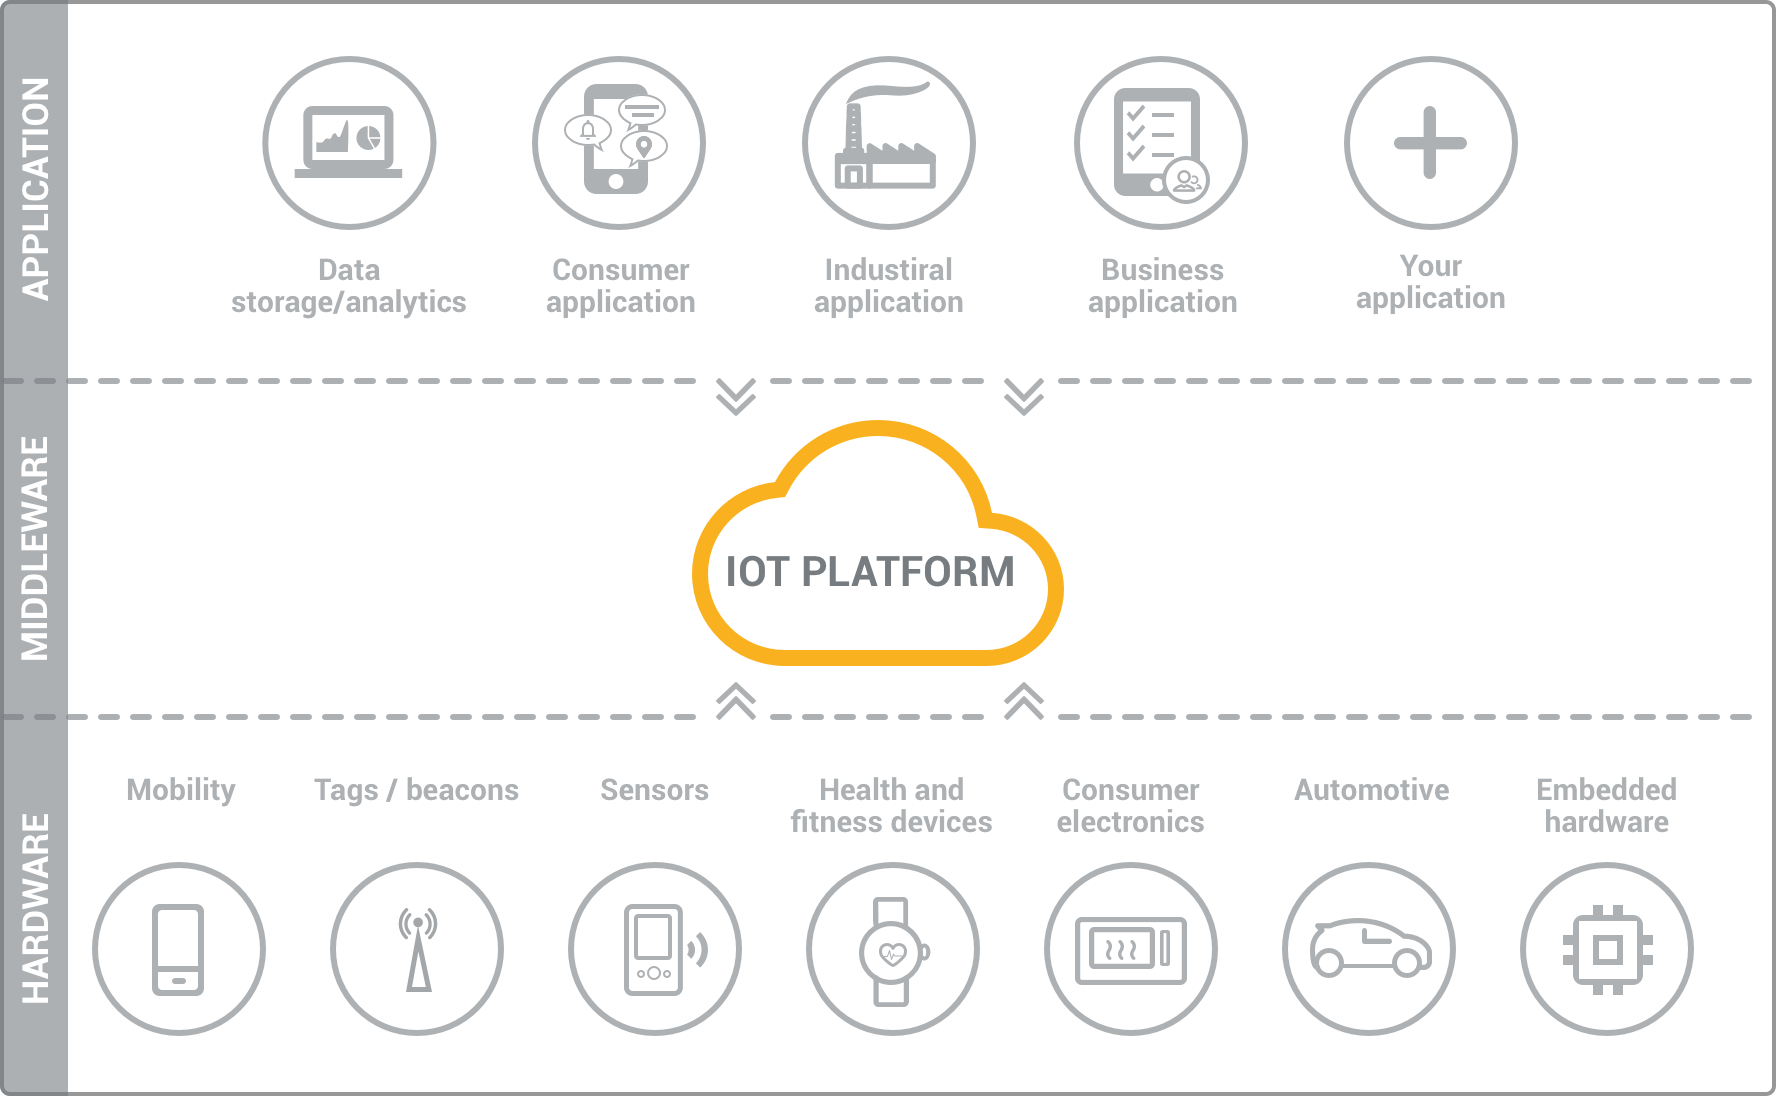 IoT platform as the middleware